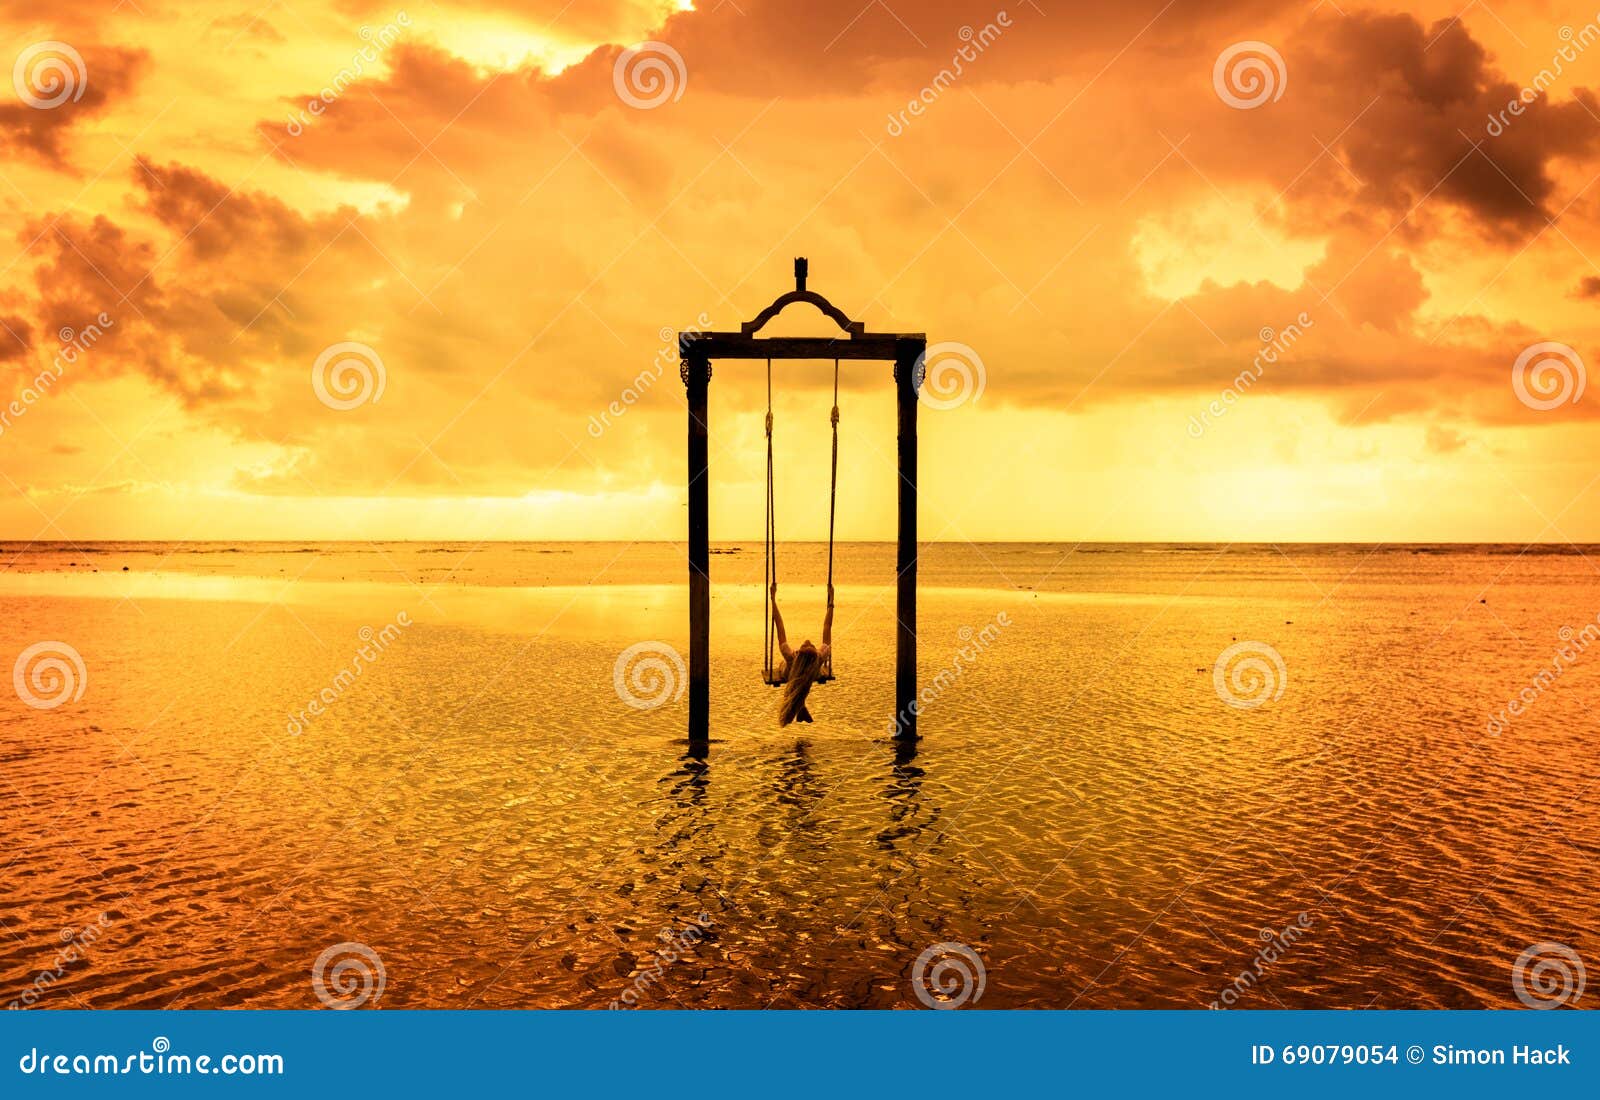 a girl on a swing over the sea at sunset in bali,indonesia 7